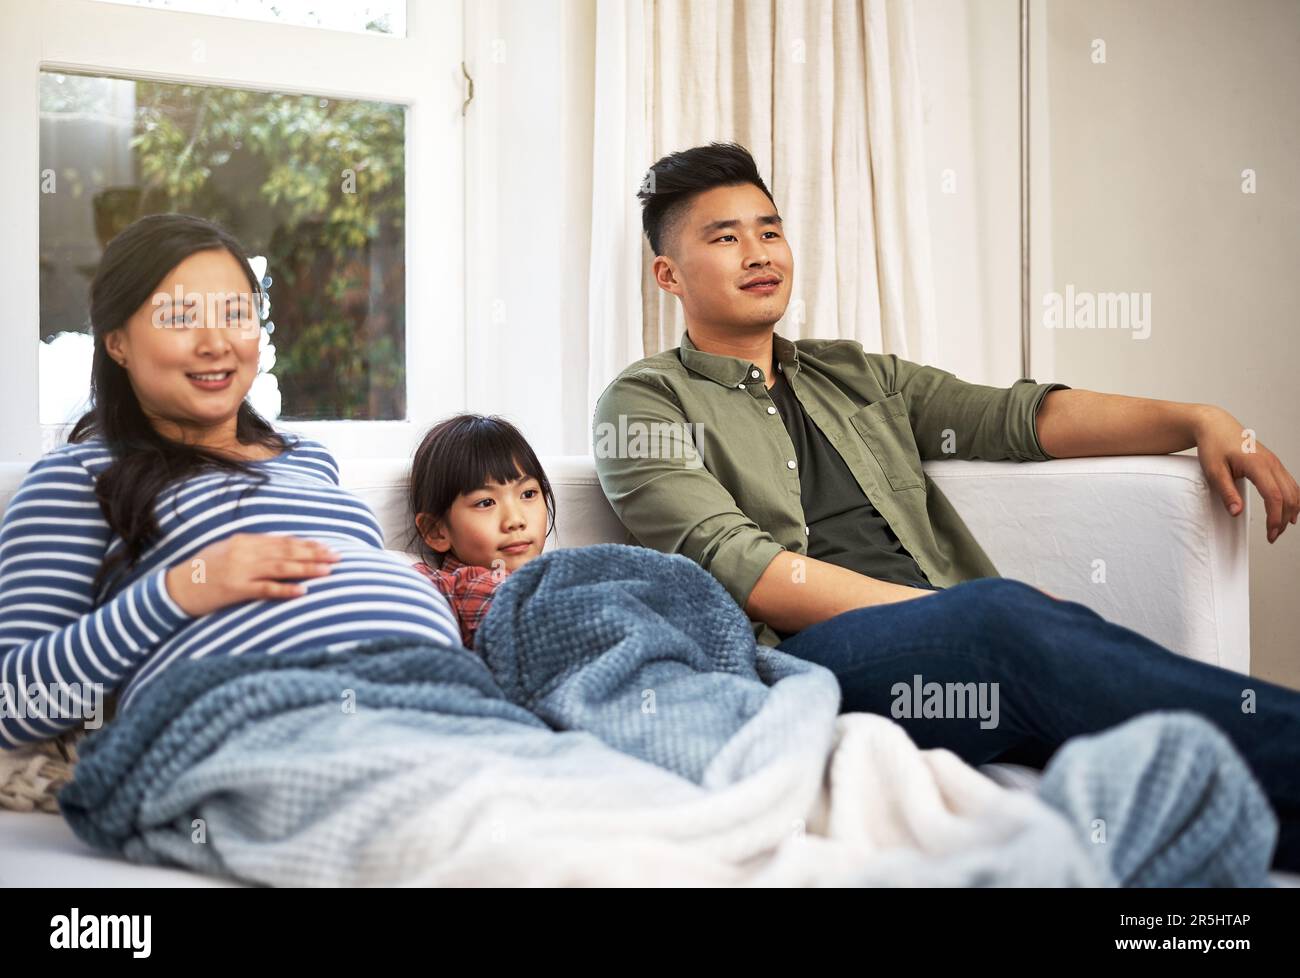 Movie night with the whole family. a family watching television together at home. Stock Photo